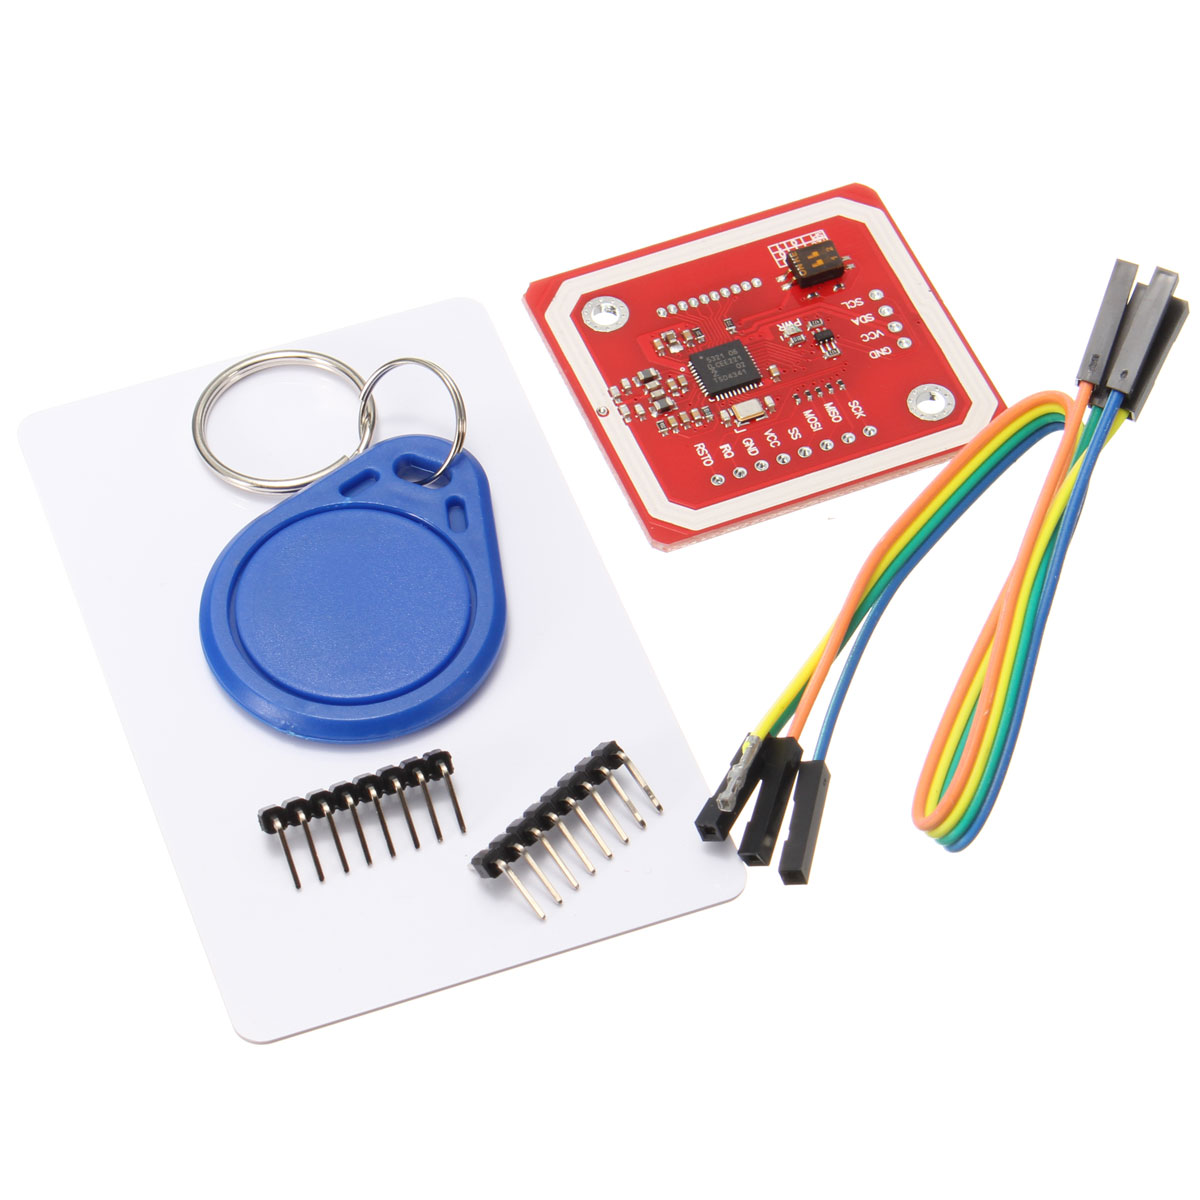 PN532-NFC-RFID-Module-V3-Reader-Writer-Breakout-Board-For-Android-1213484